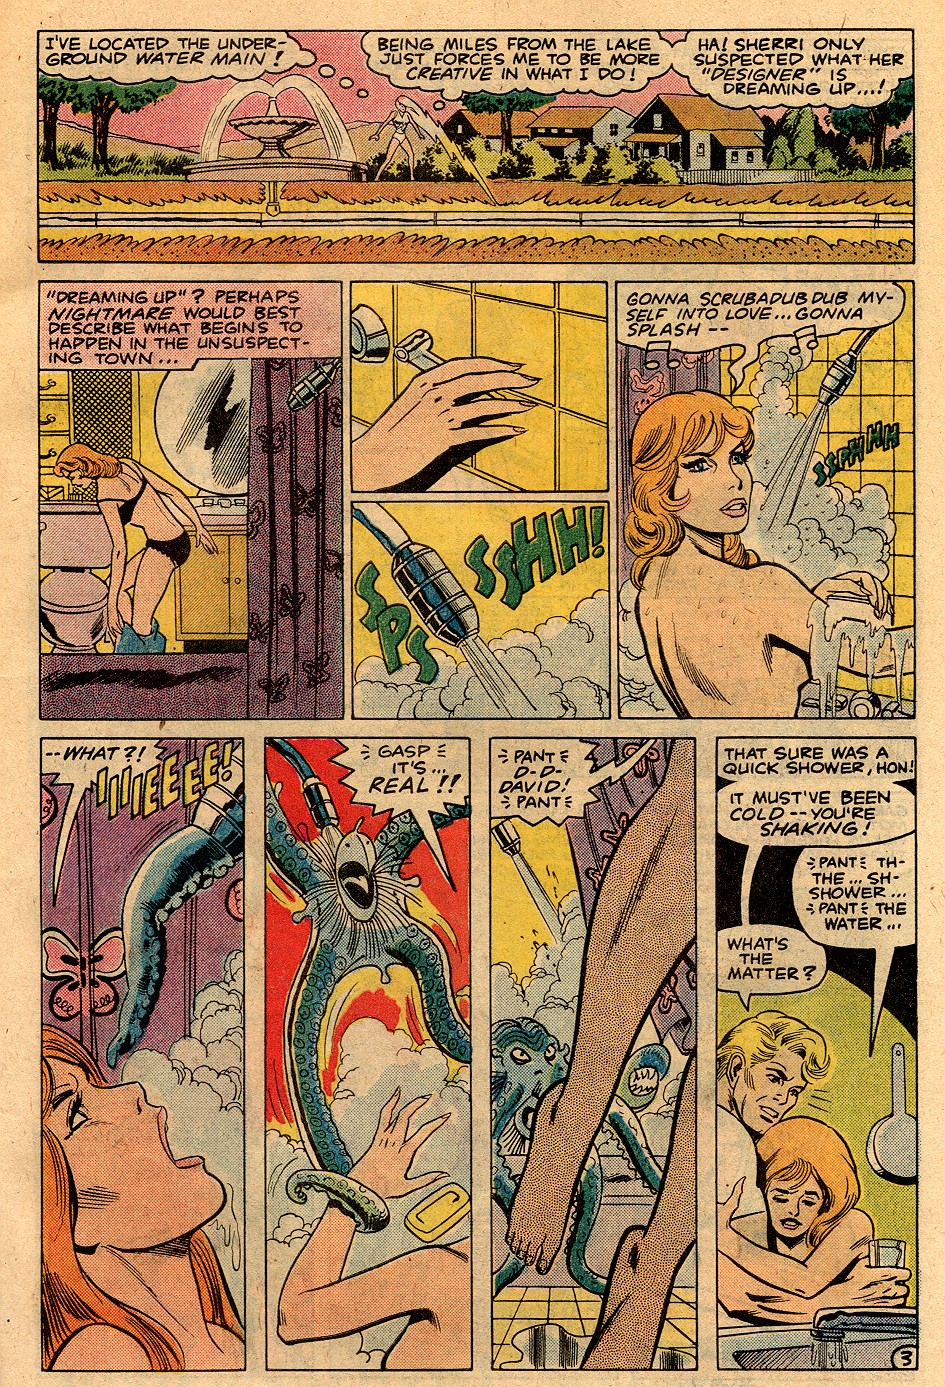 The New Adventures of Superboy 34 Page 26